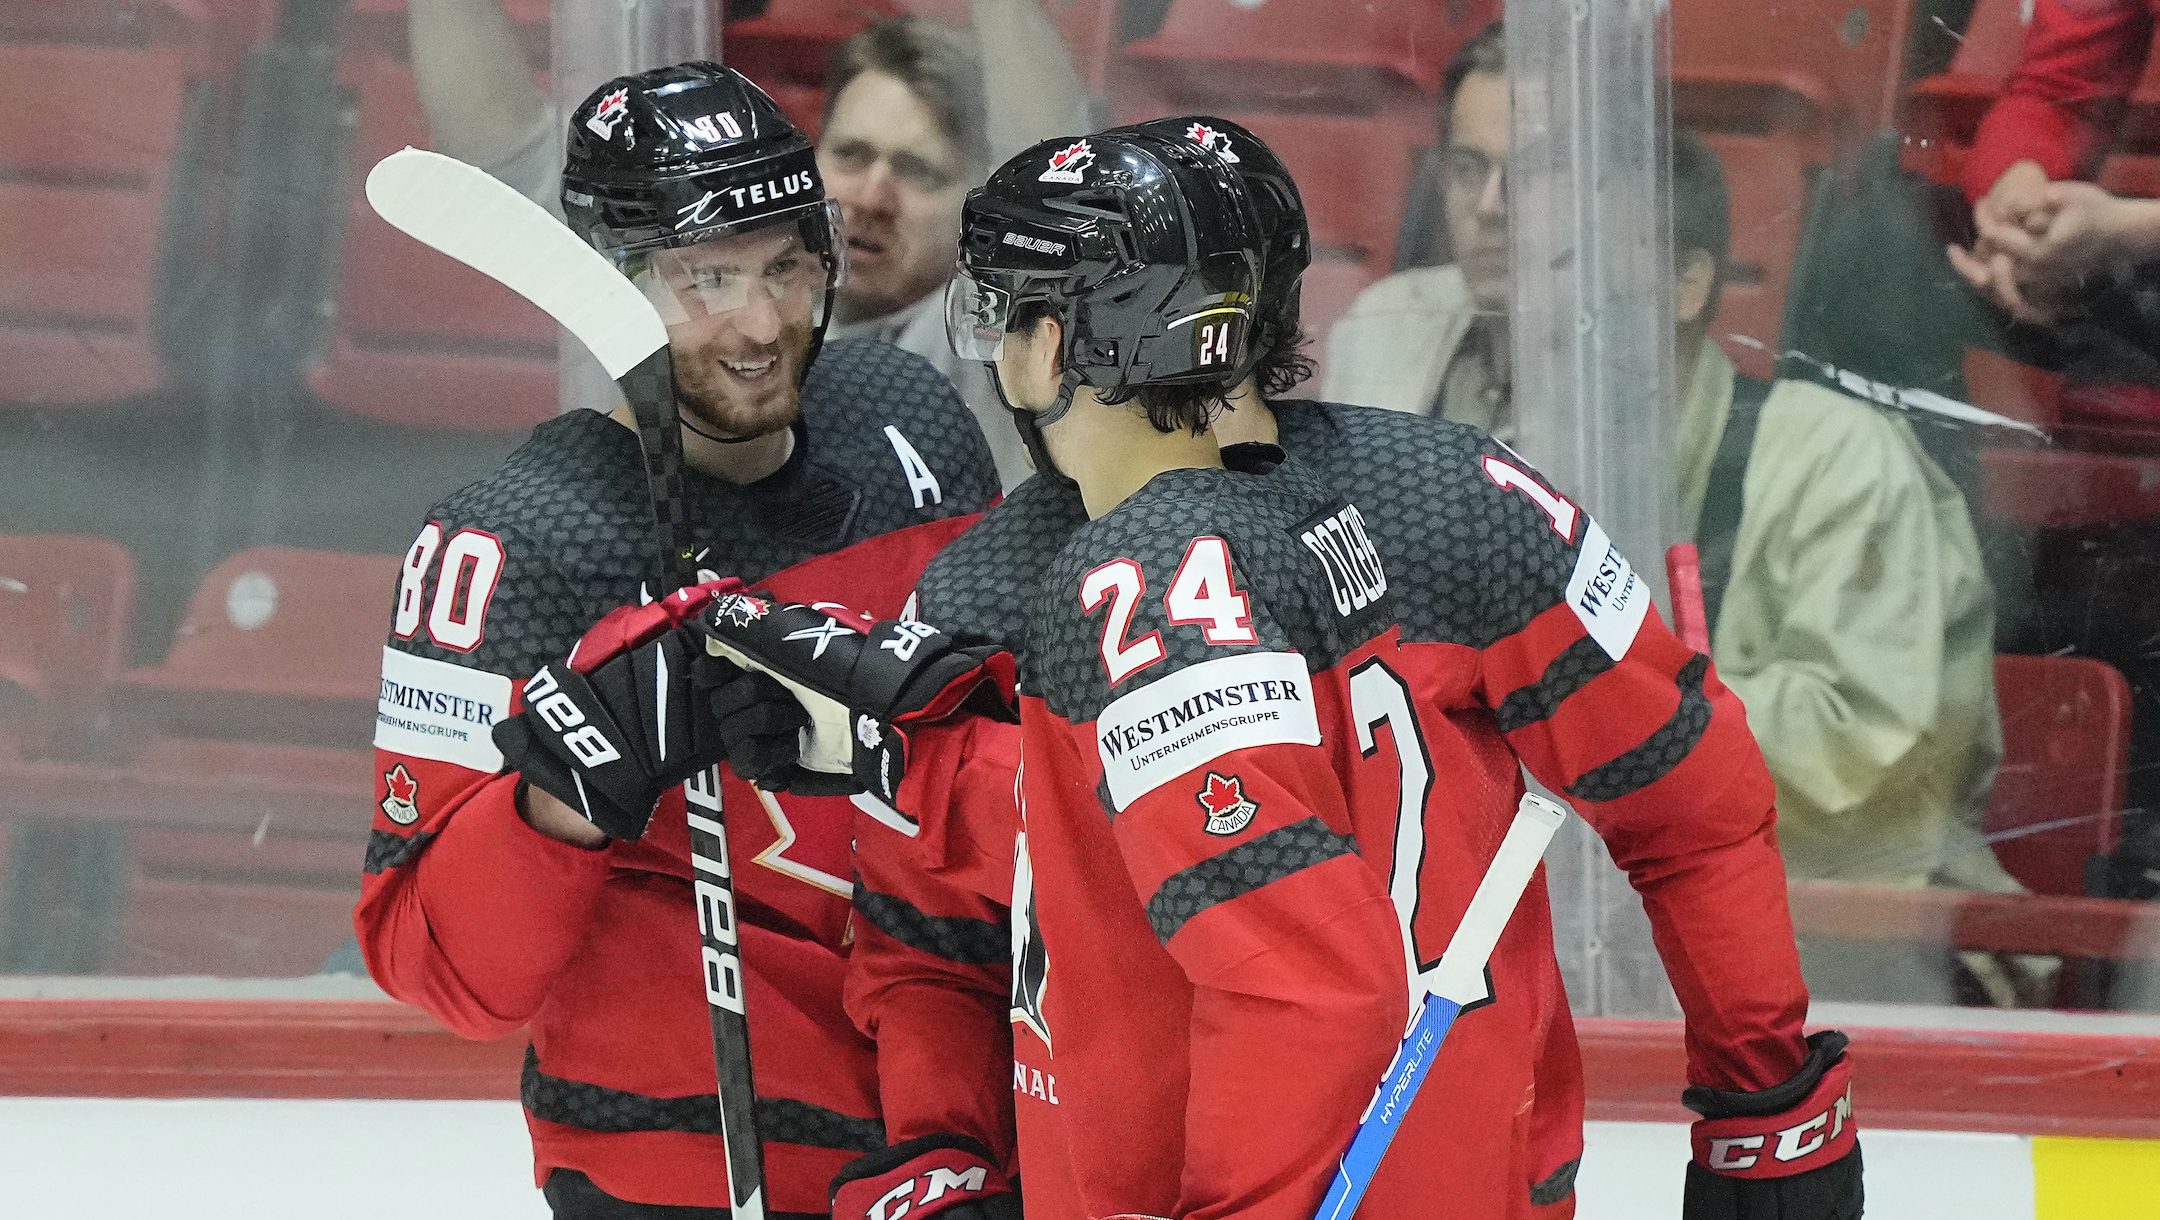 Hockey Worlds: Who is playing for Team Canada and when - Team